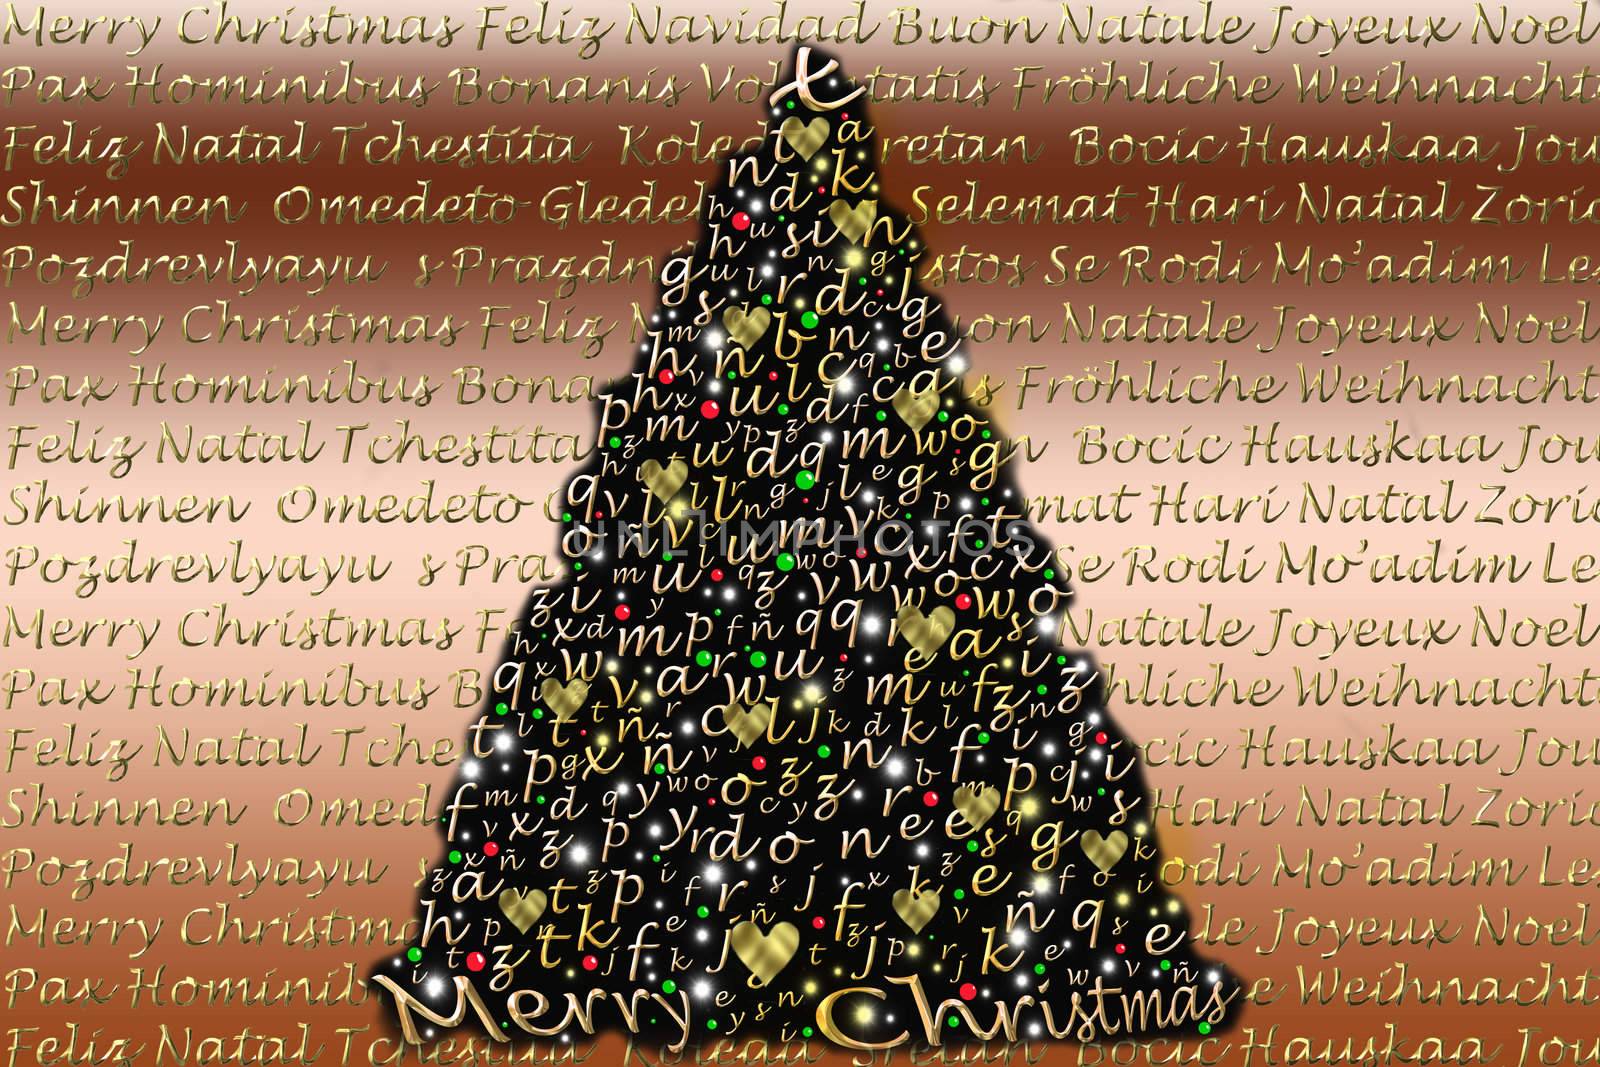 Christmas card, tree alphabet, Christmas greetings in many languages